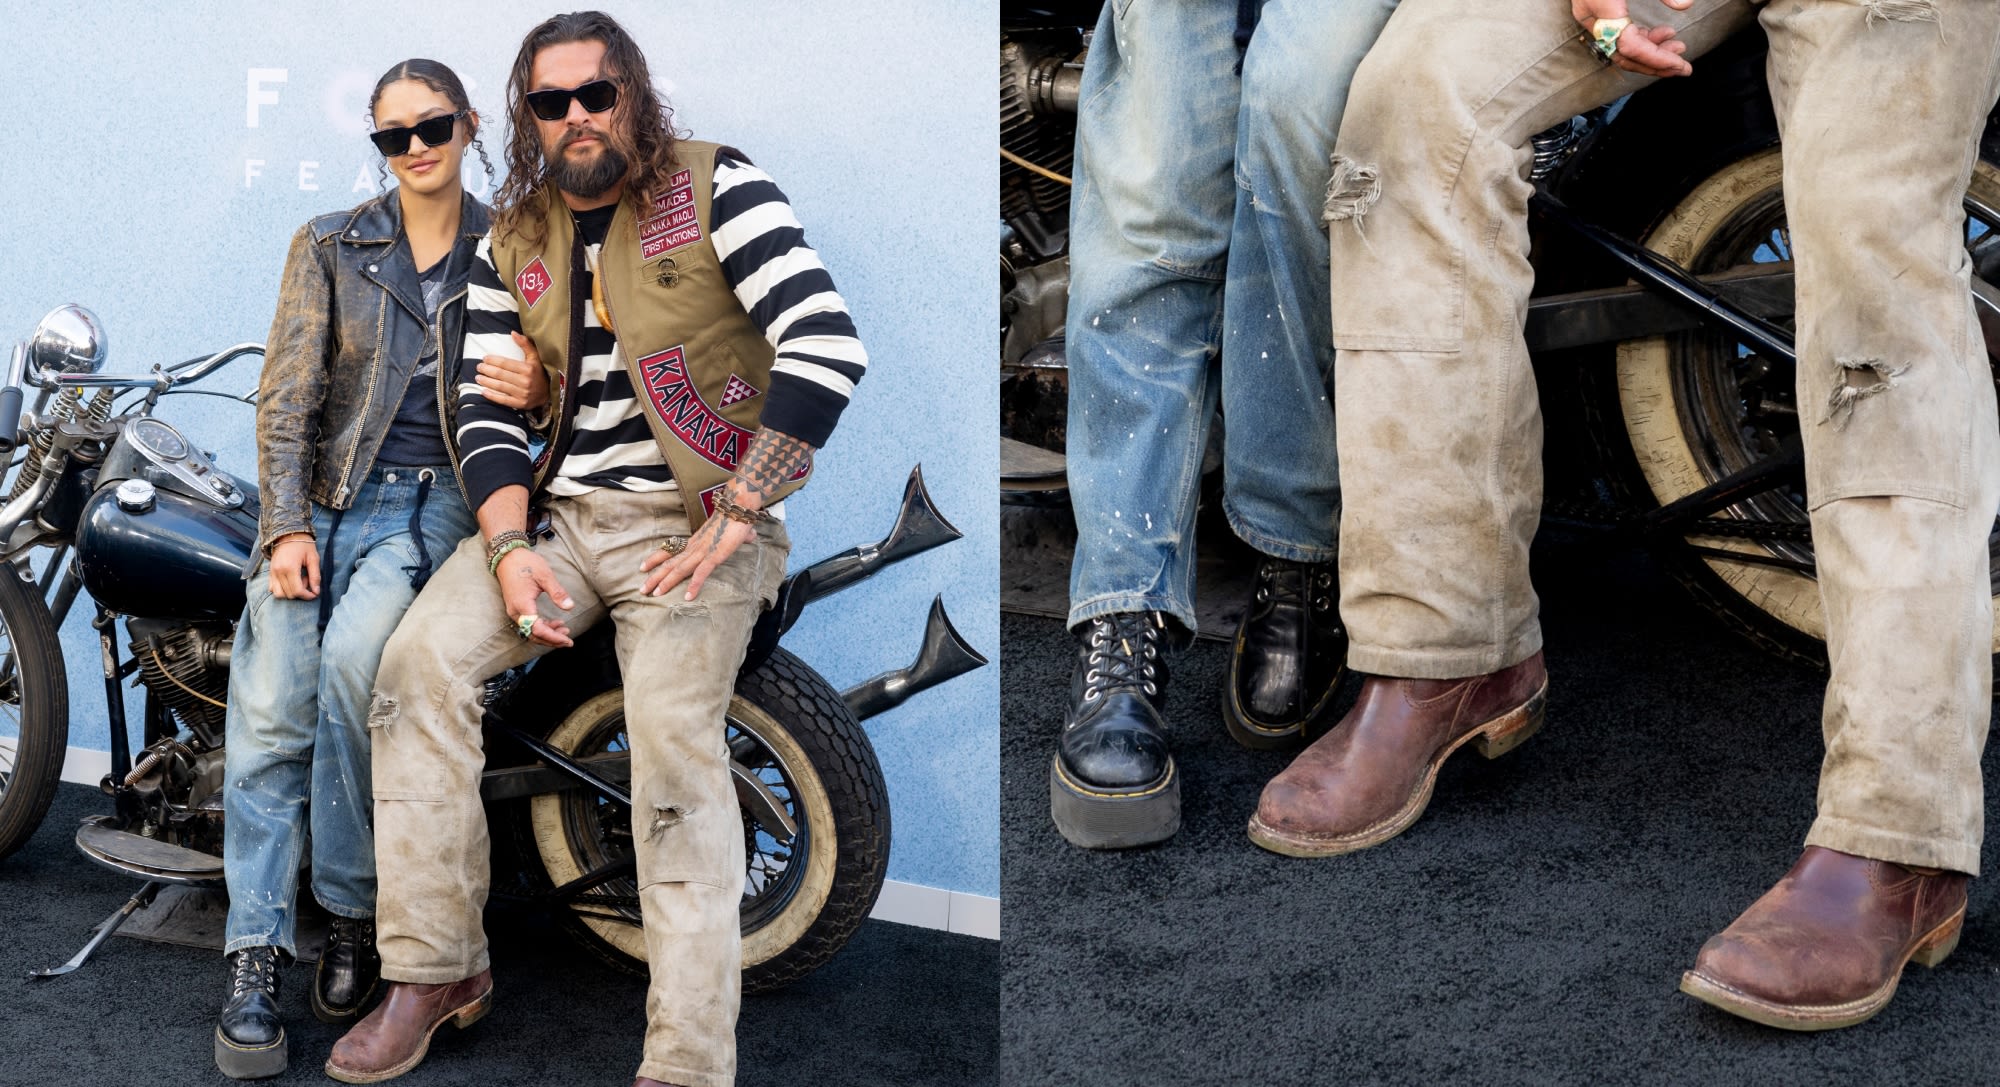 Jason Momoa and Daughter Lola Iolani Momoa Bring Edge to ‘The Bikeriders’ Premiere in Leather Boots